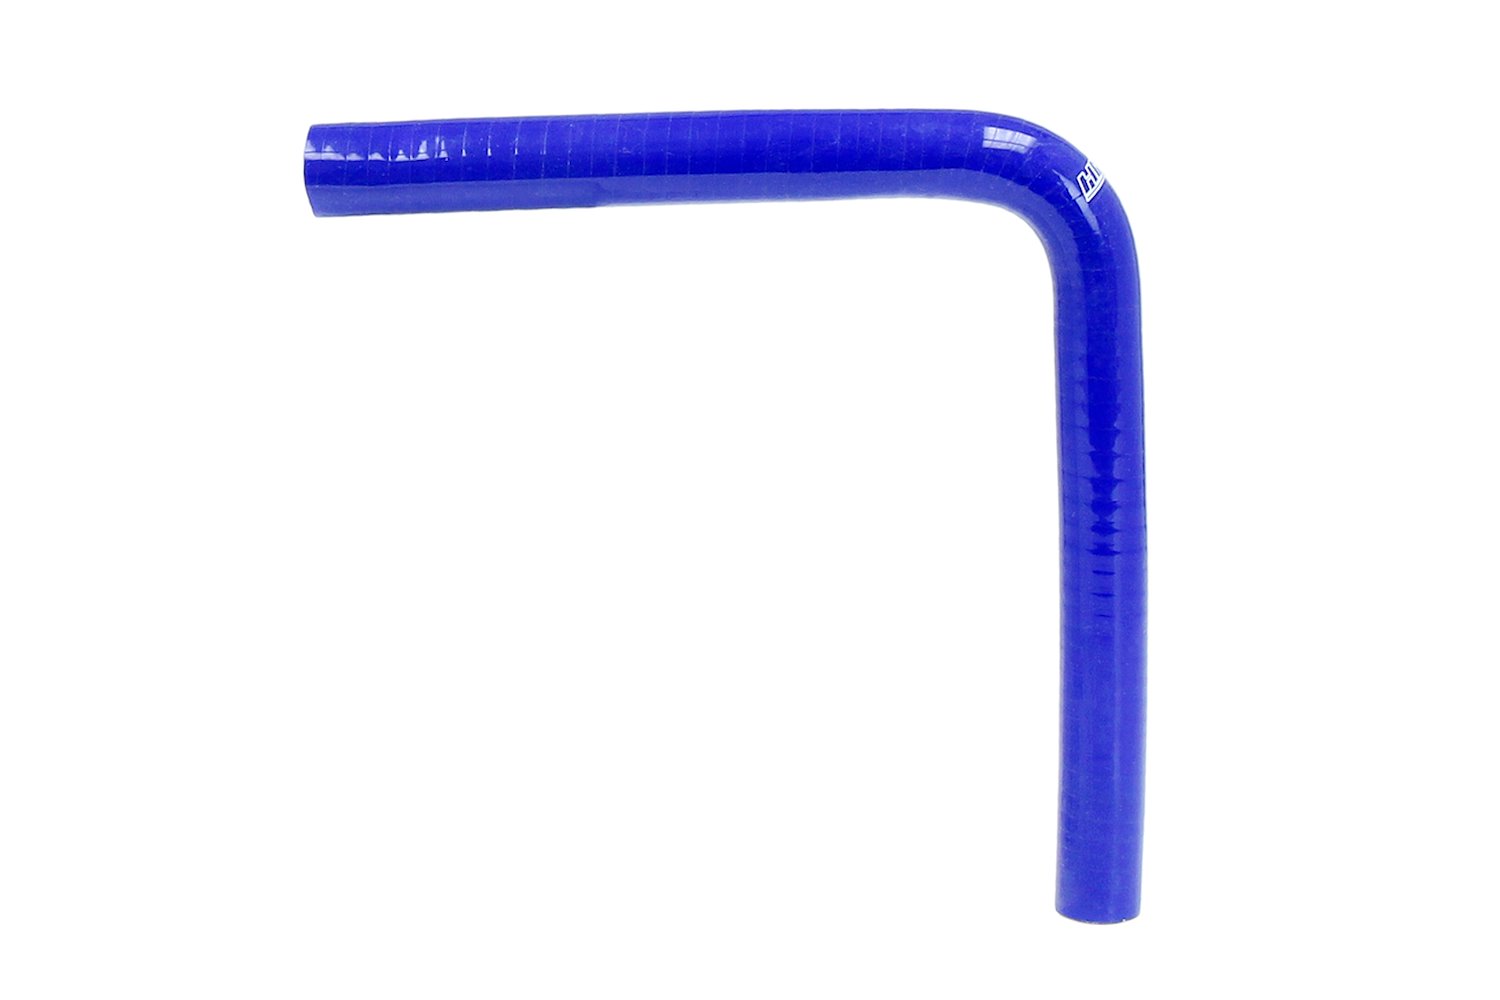 HTSEC90-038-BLUE Silicone 90-Degree Elbow Coupler Hose, High-Temp 4-Ply Reinforced, 3/8 in. ID, Blue